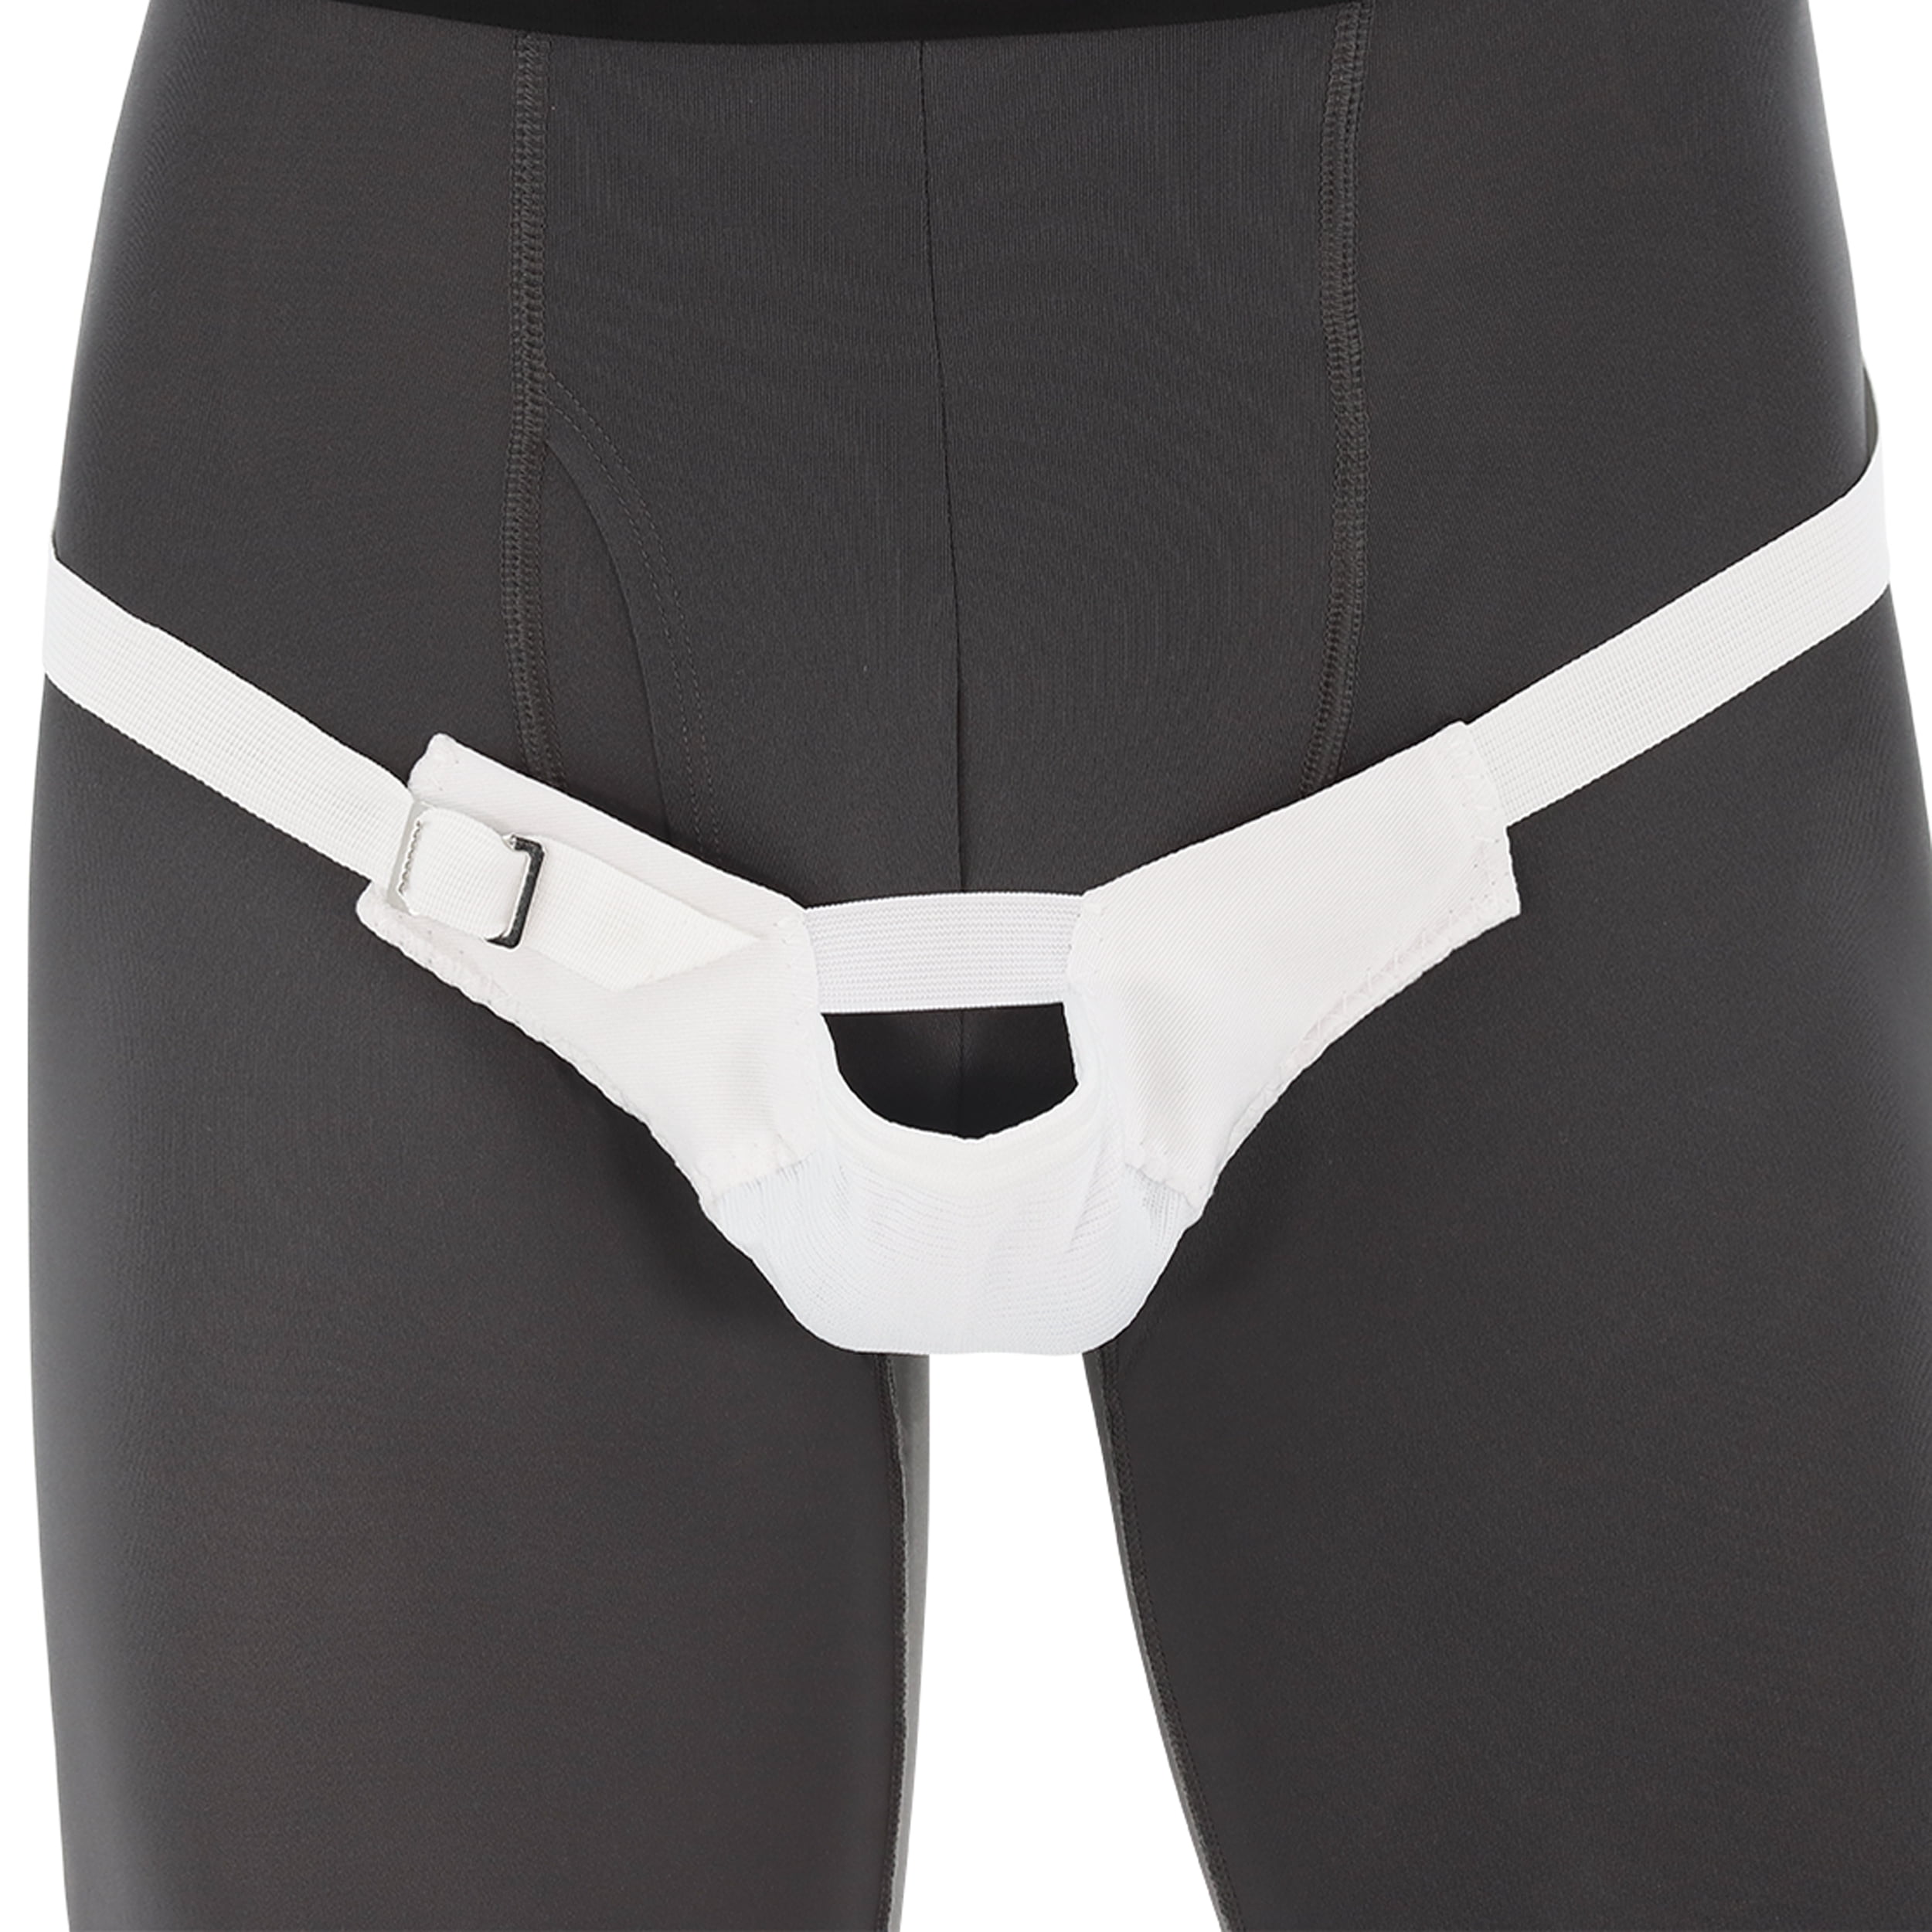 Core Products Scrotal Suspensory - Medium 